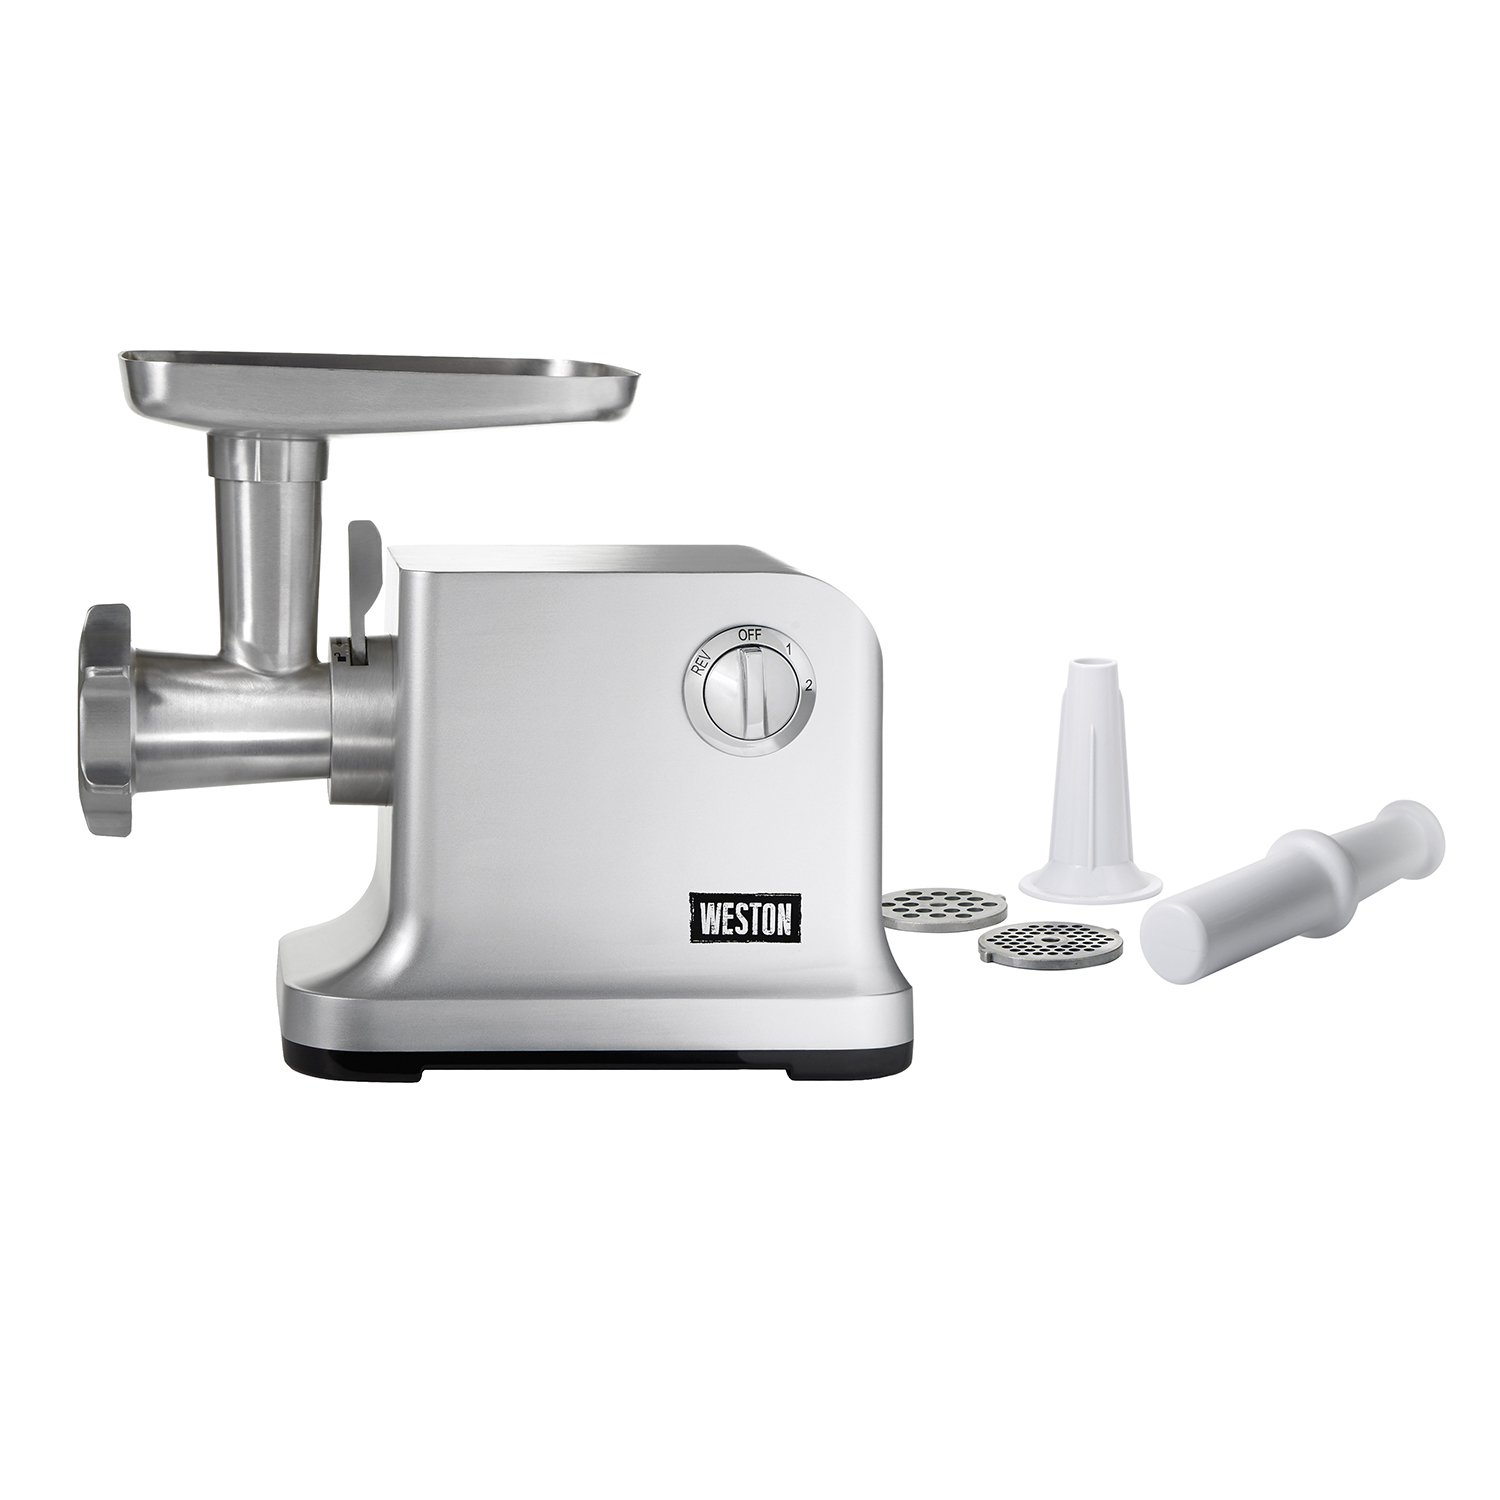 Enter for a Chance to Win a Weston 1 HP Meat Grinder